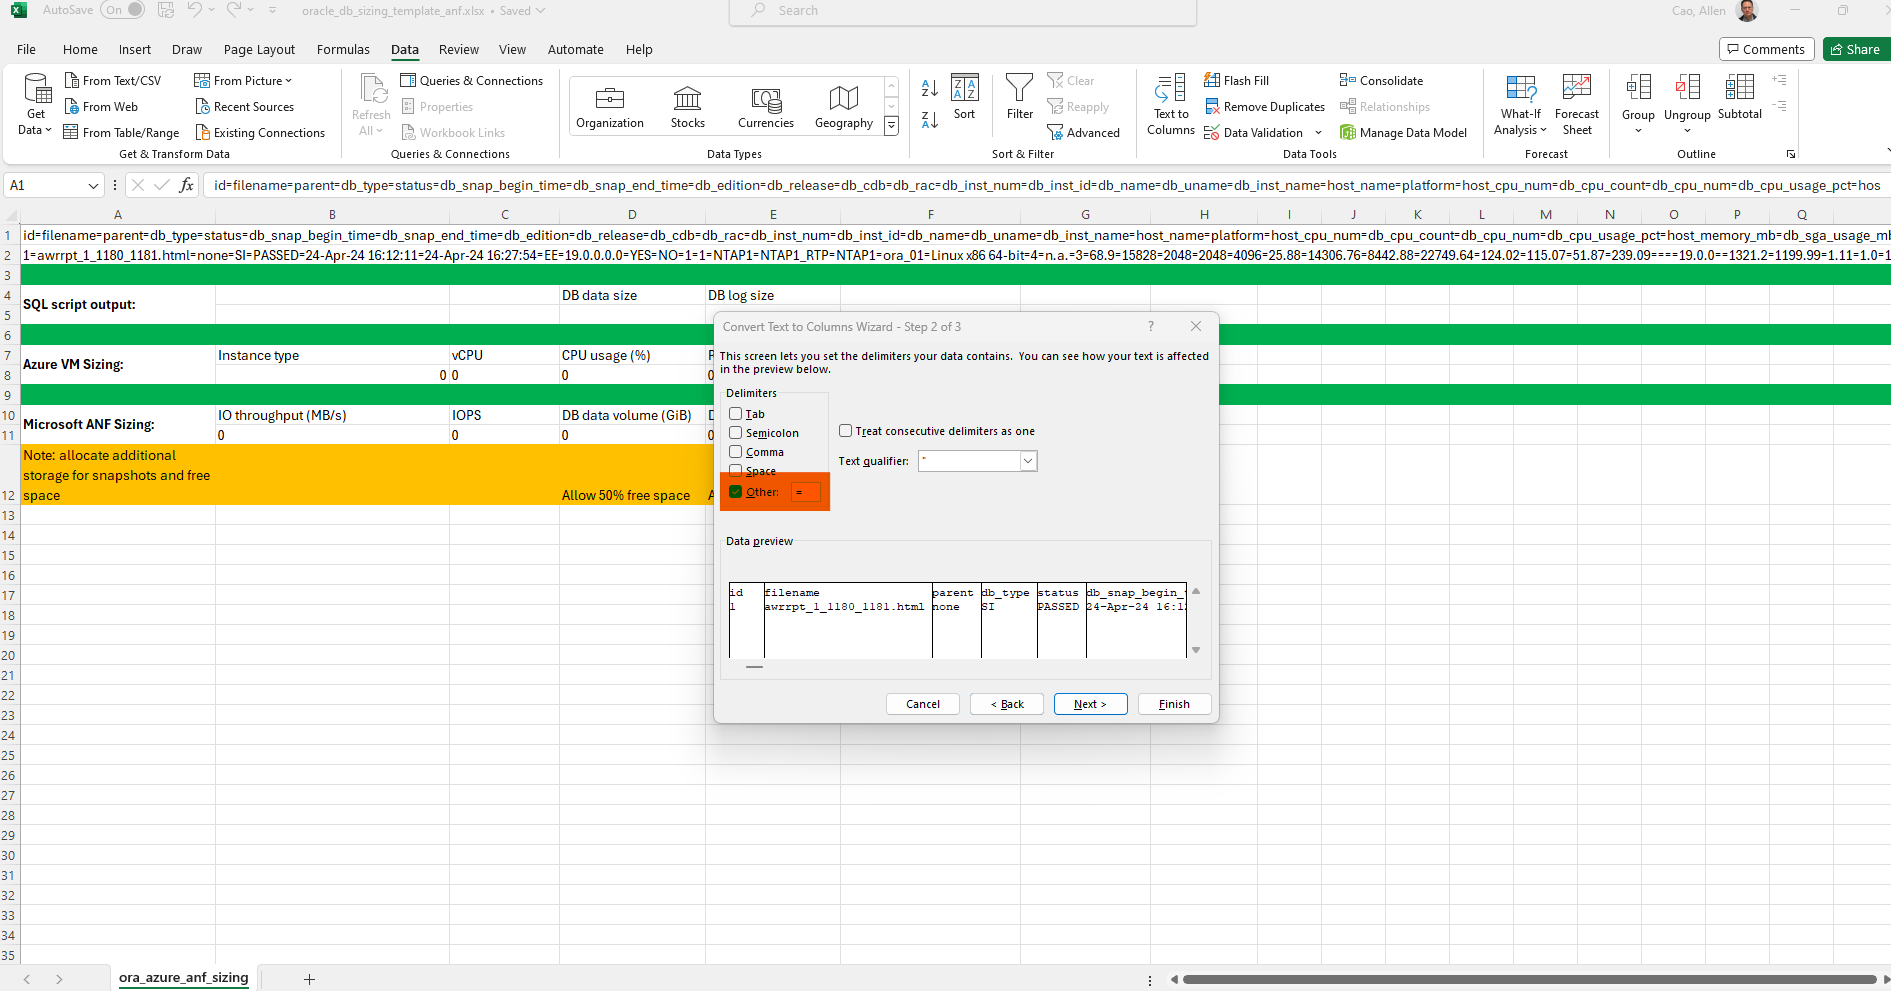 This image provides excel template screen shot for Oracle sizing